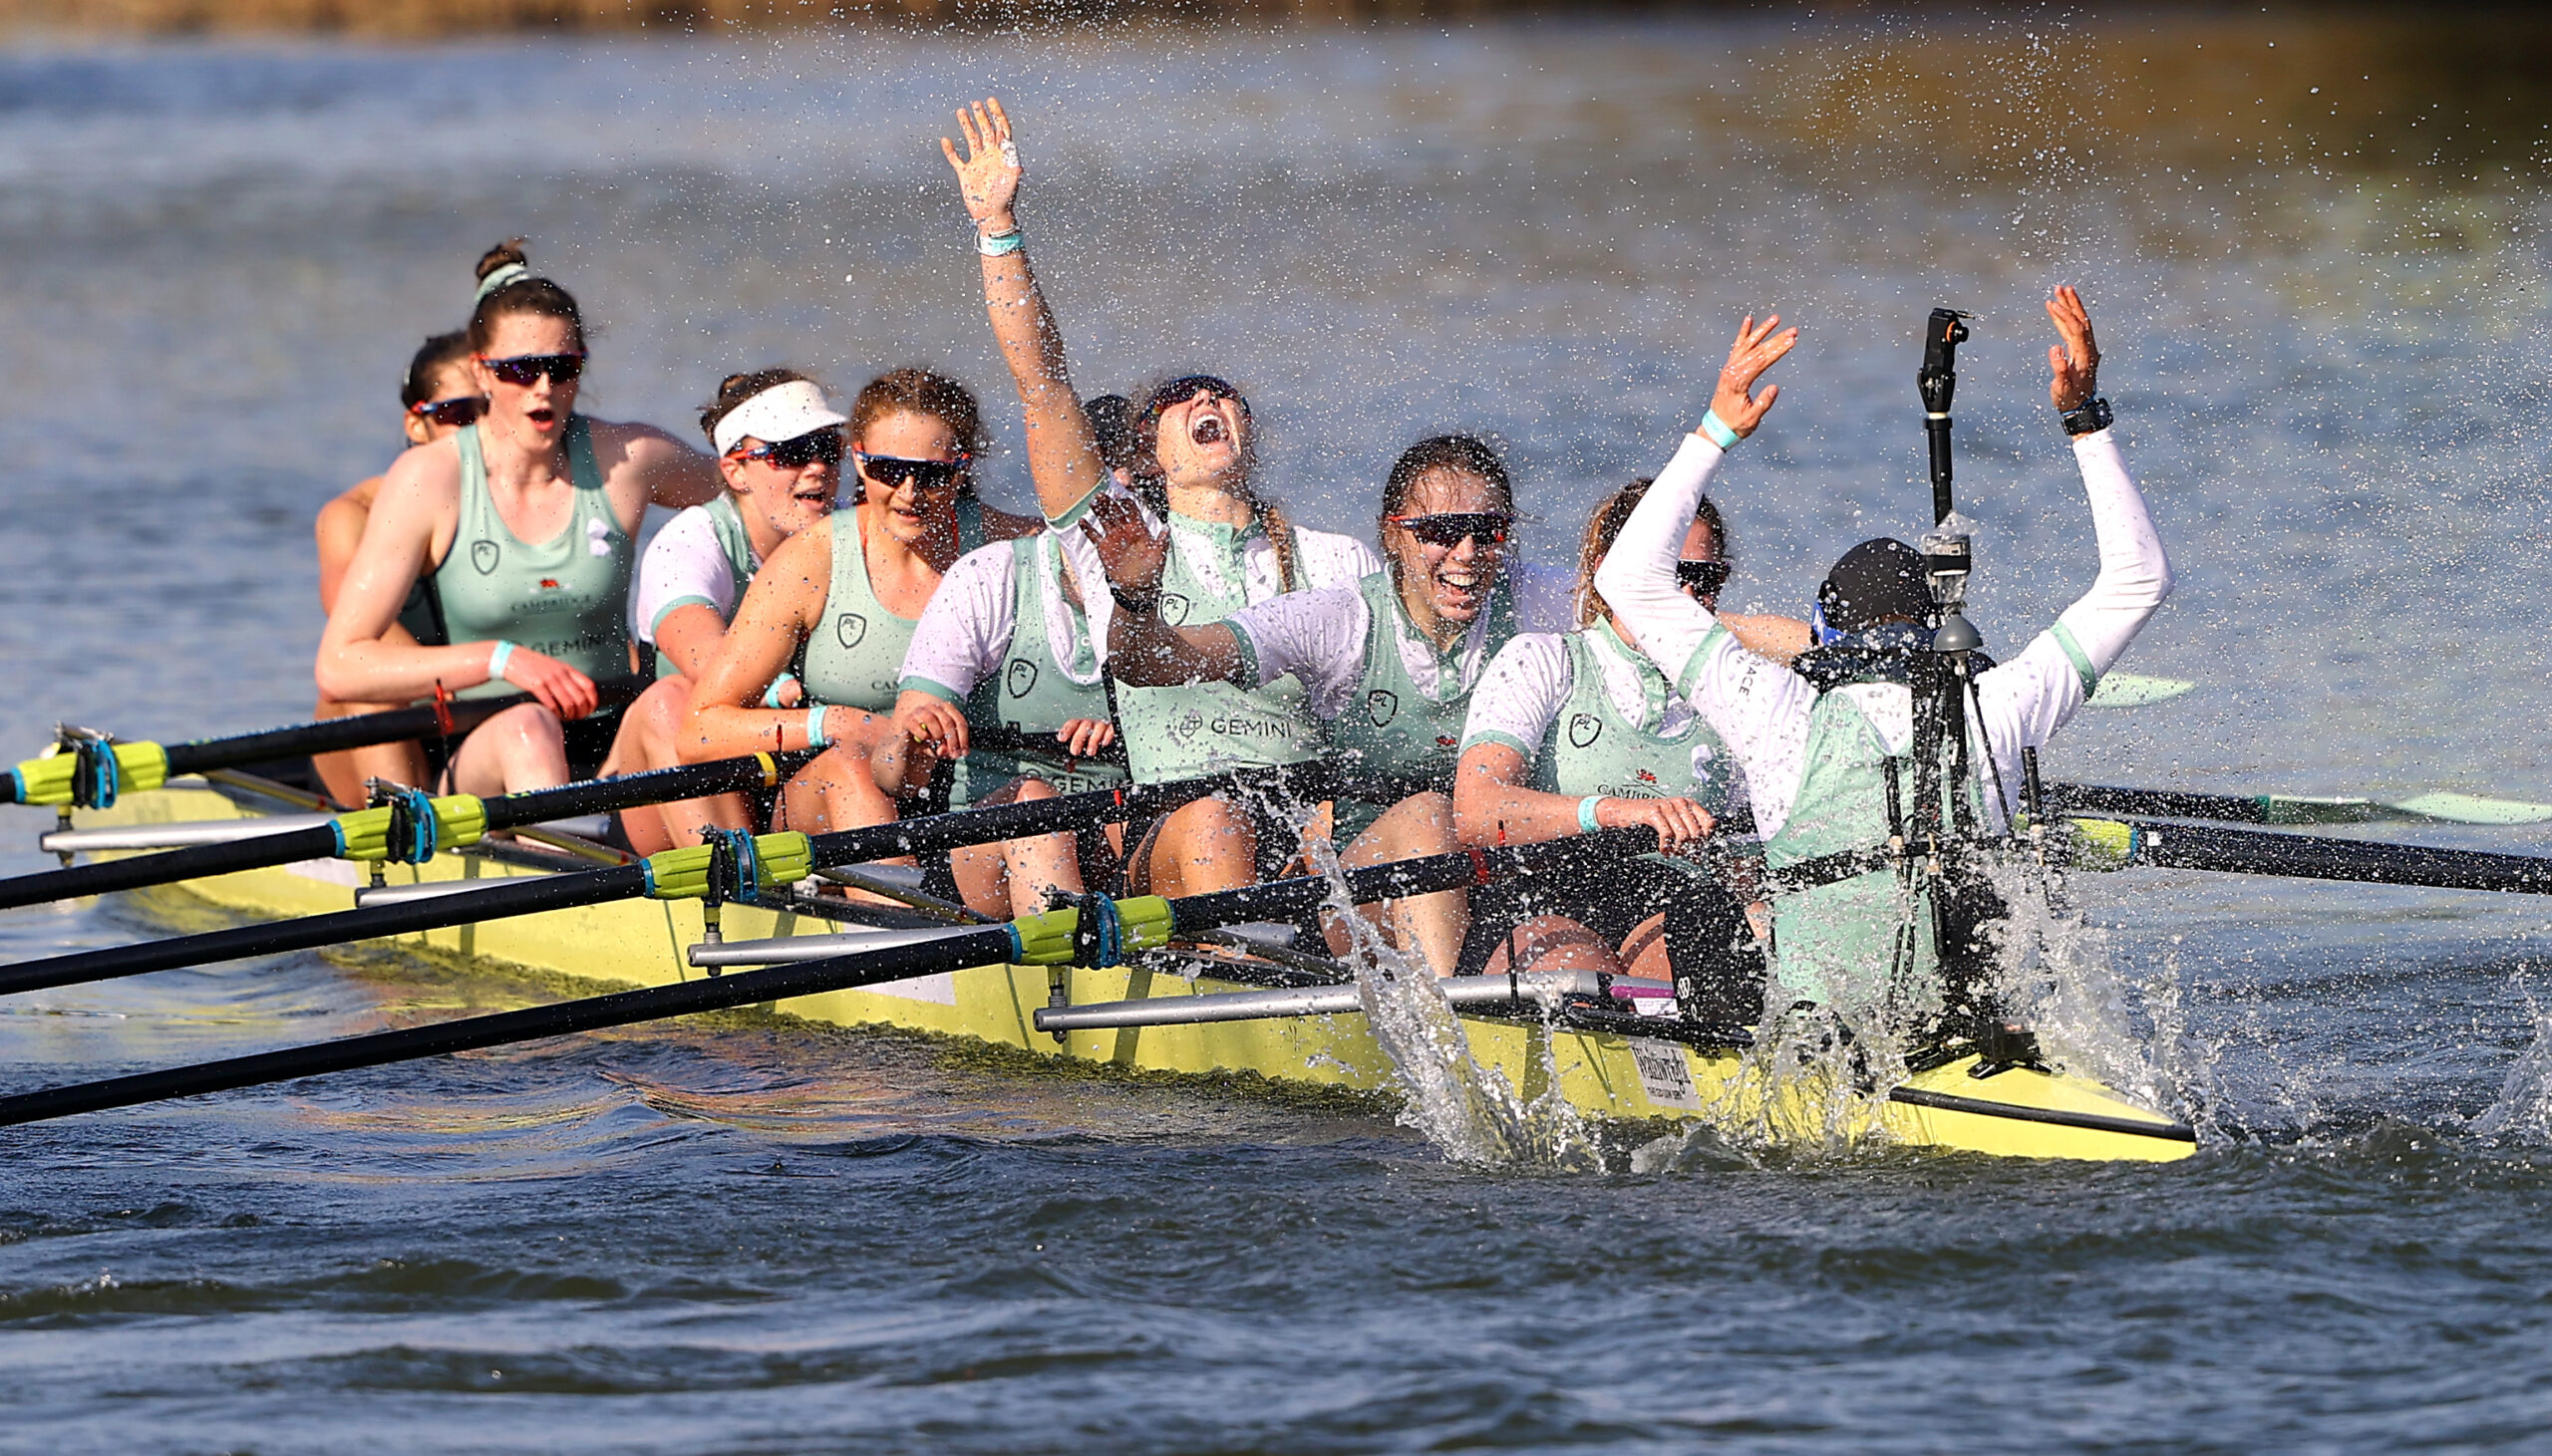 Cambridge earns double victory in first Boat Race held outside London since Second World War